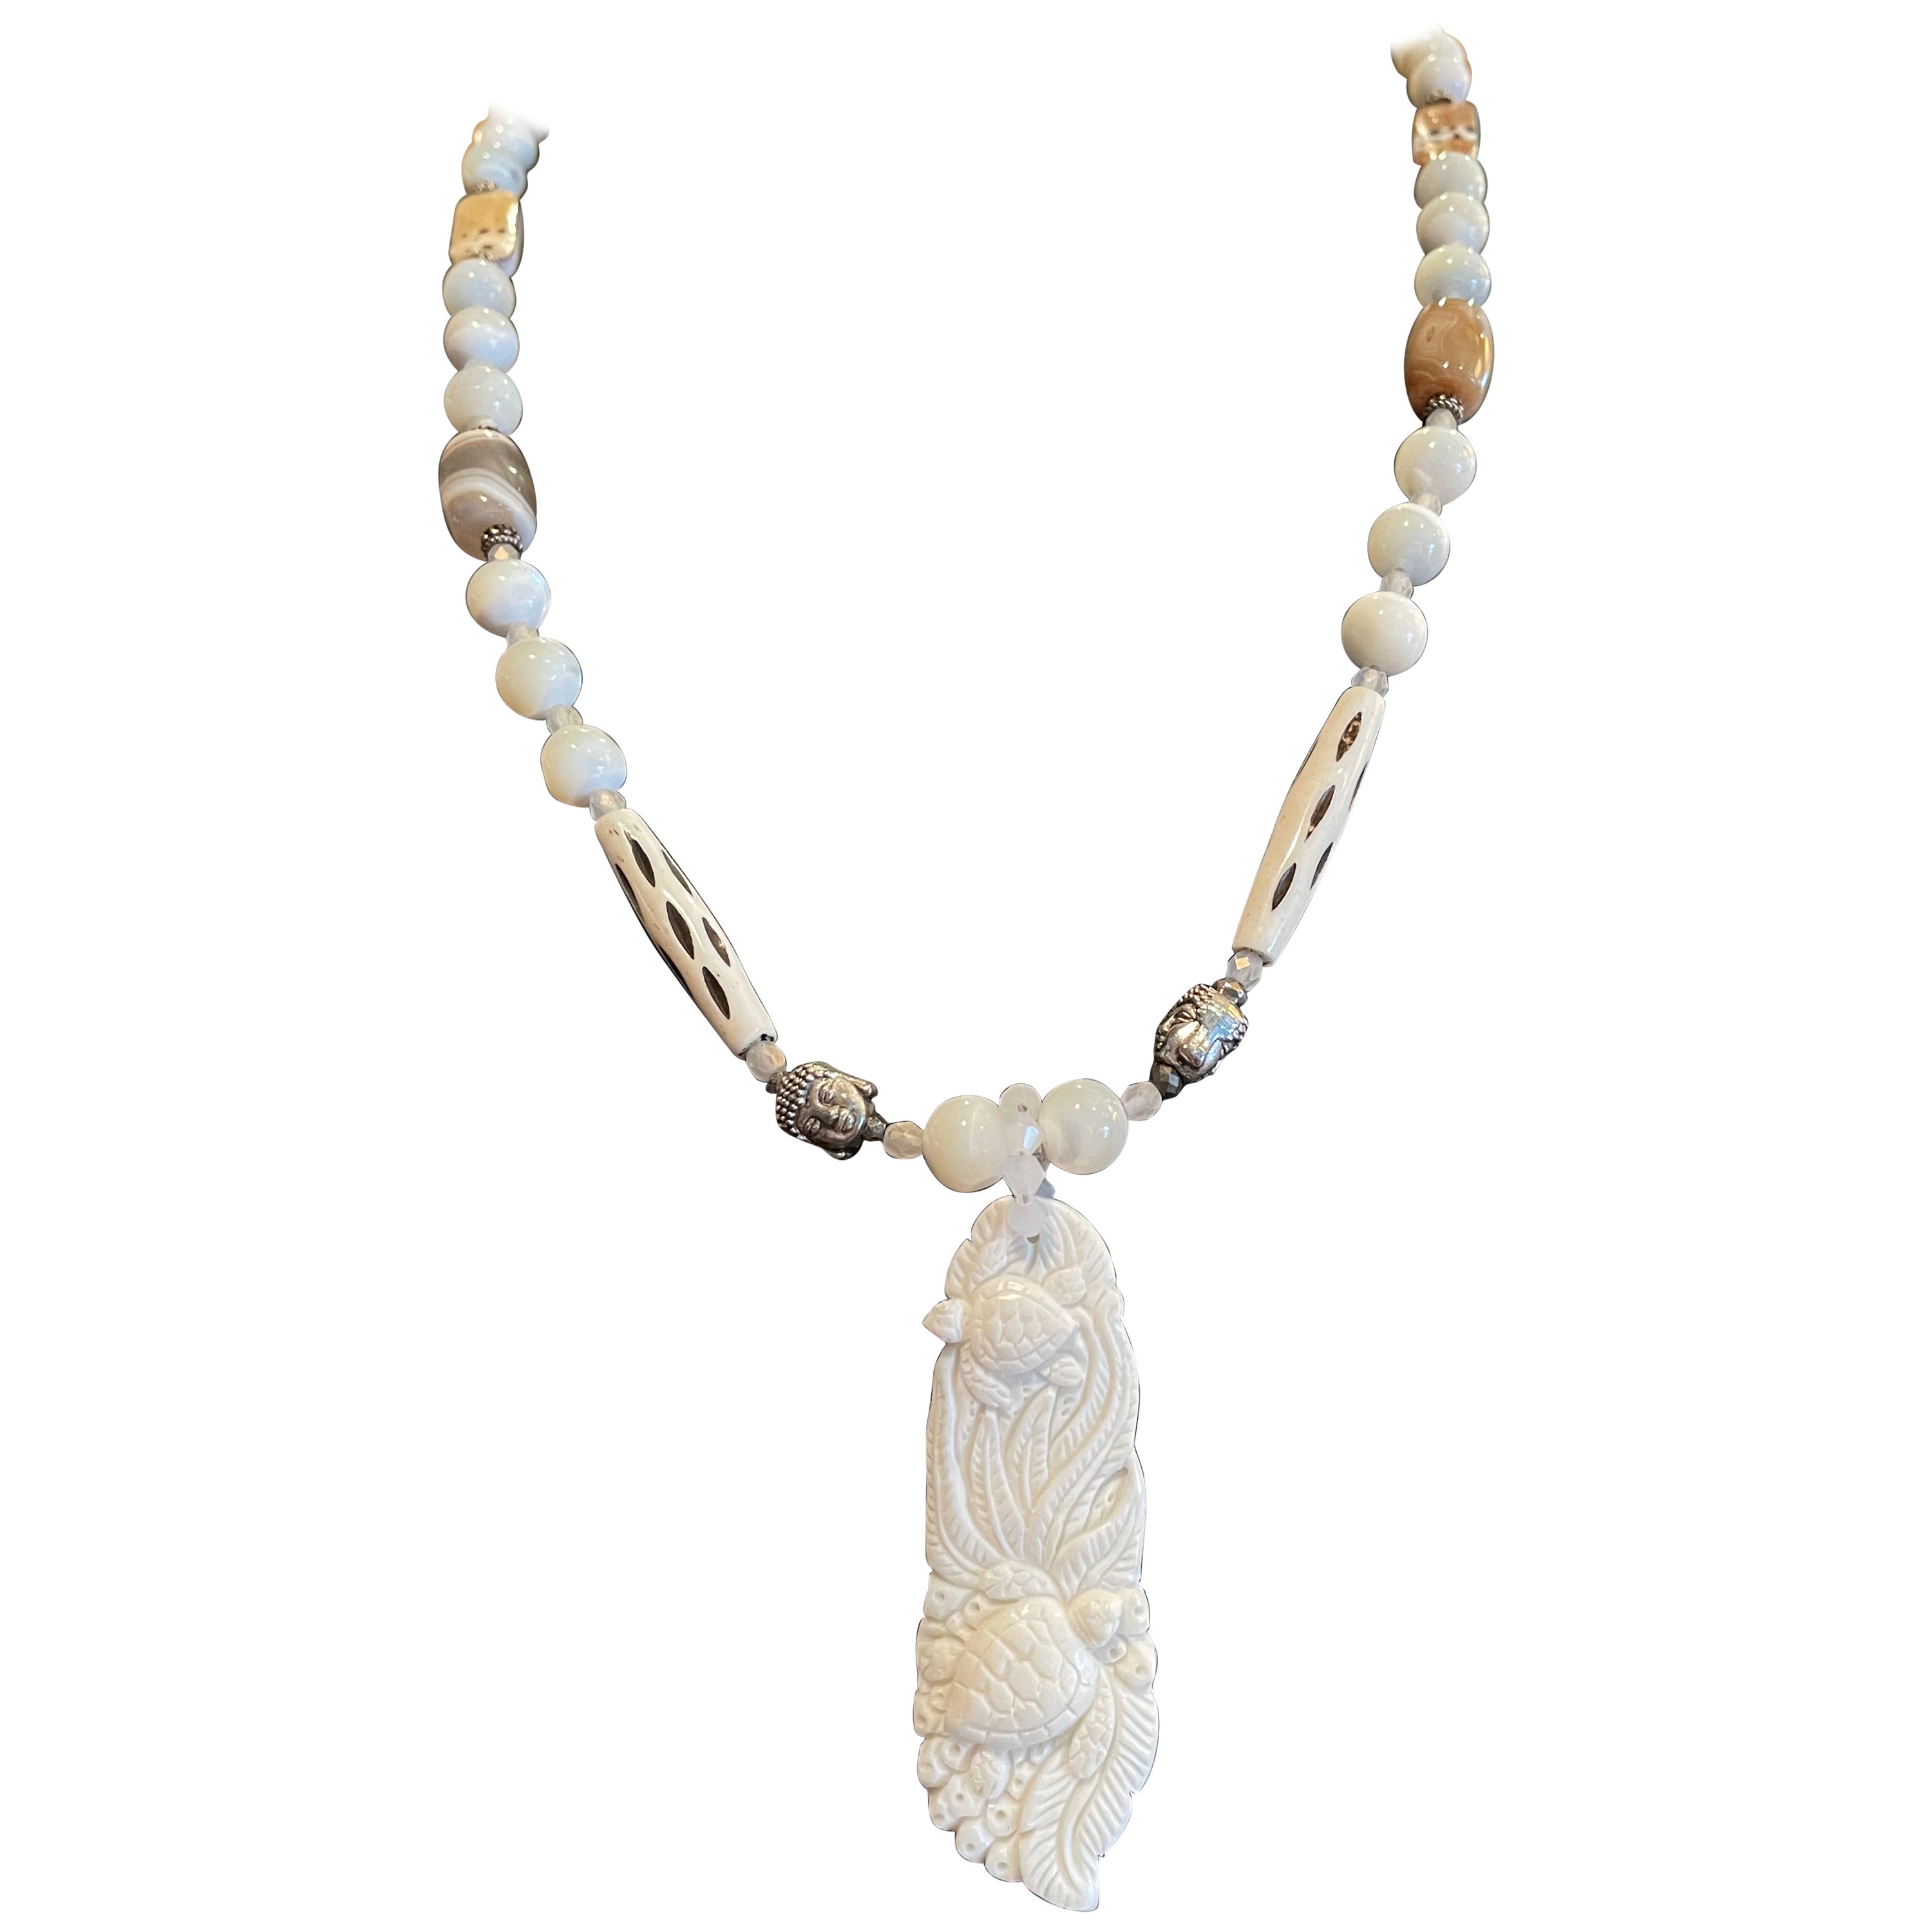 LB handmade one of a kind carved bone pendant stunning MOP necklace